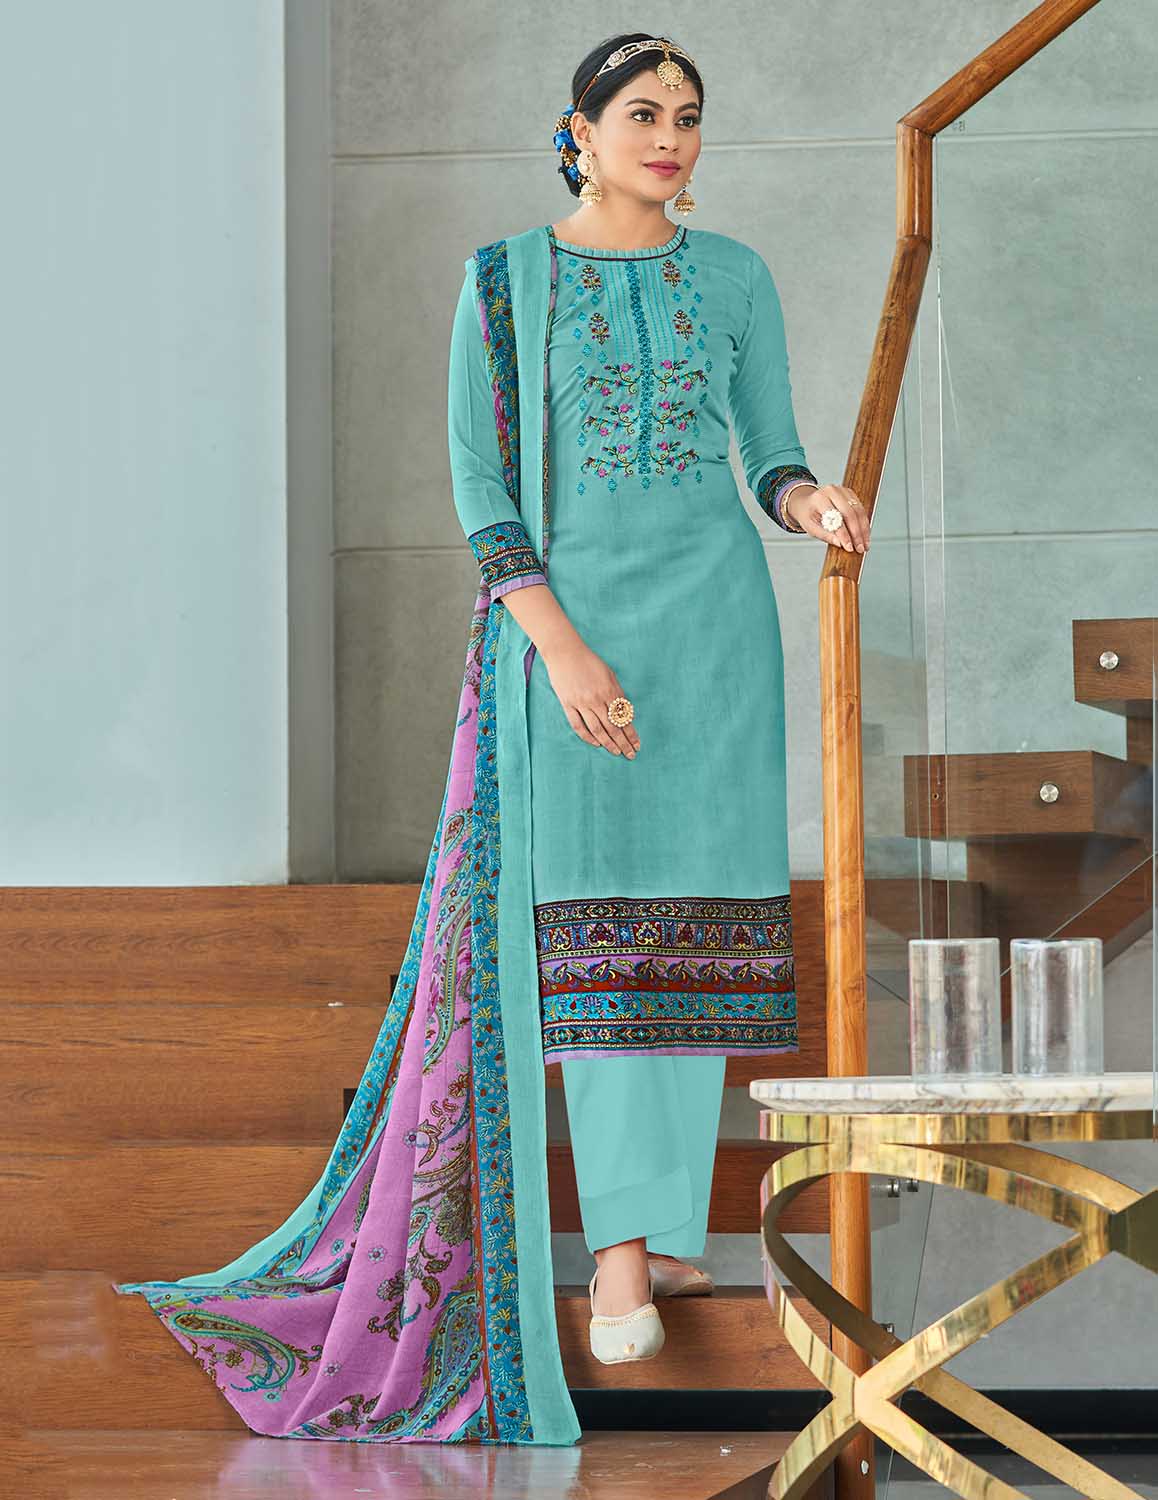 Unstitched Cotton Women Aqua Blue Suit Material with Embroidery